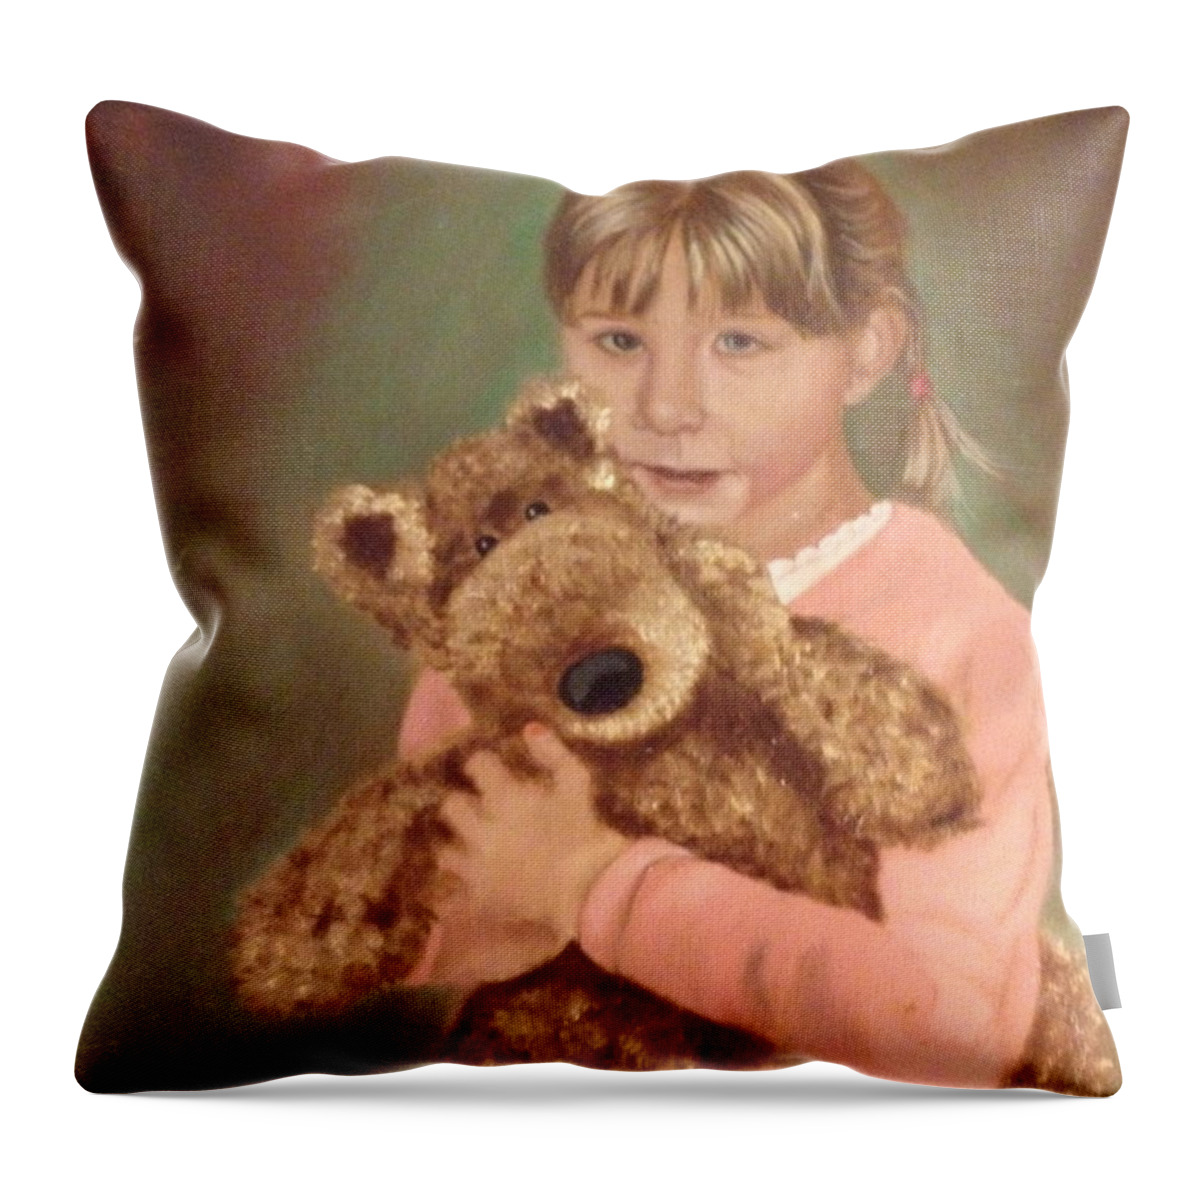 Children Throw Pillow featuring the painting Teddy Bear by Sharon Schultz